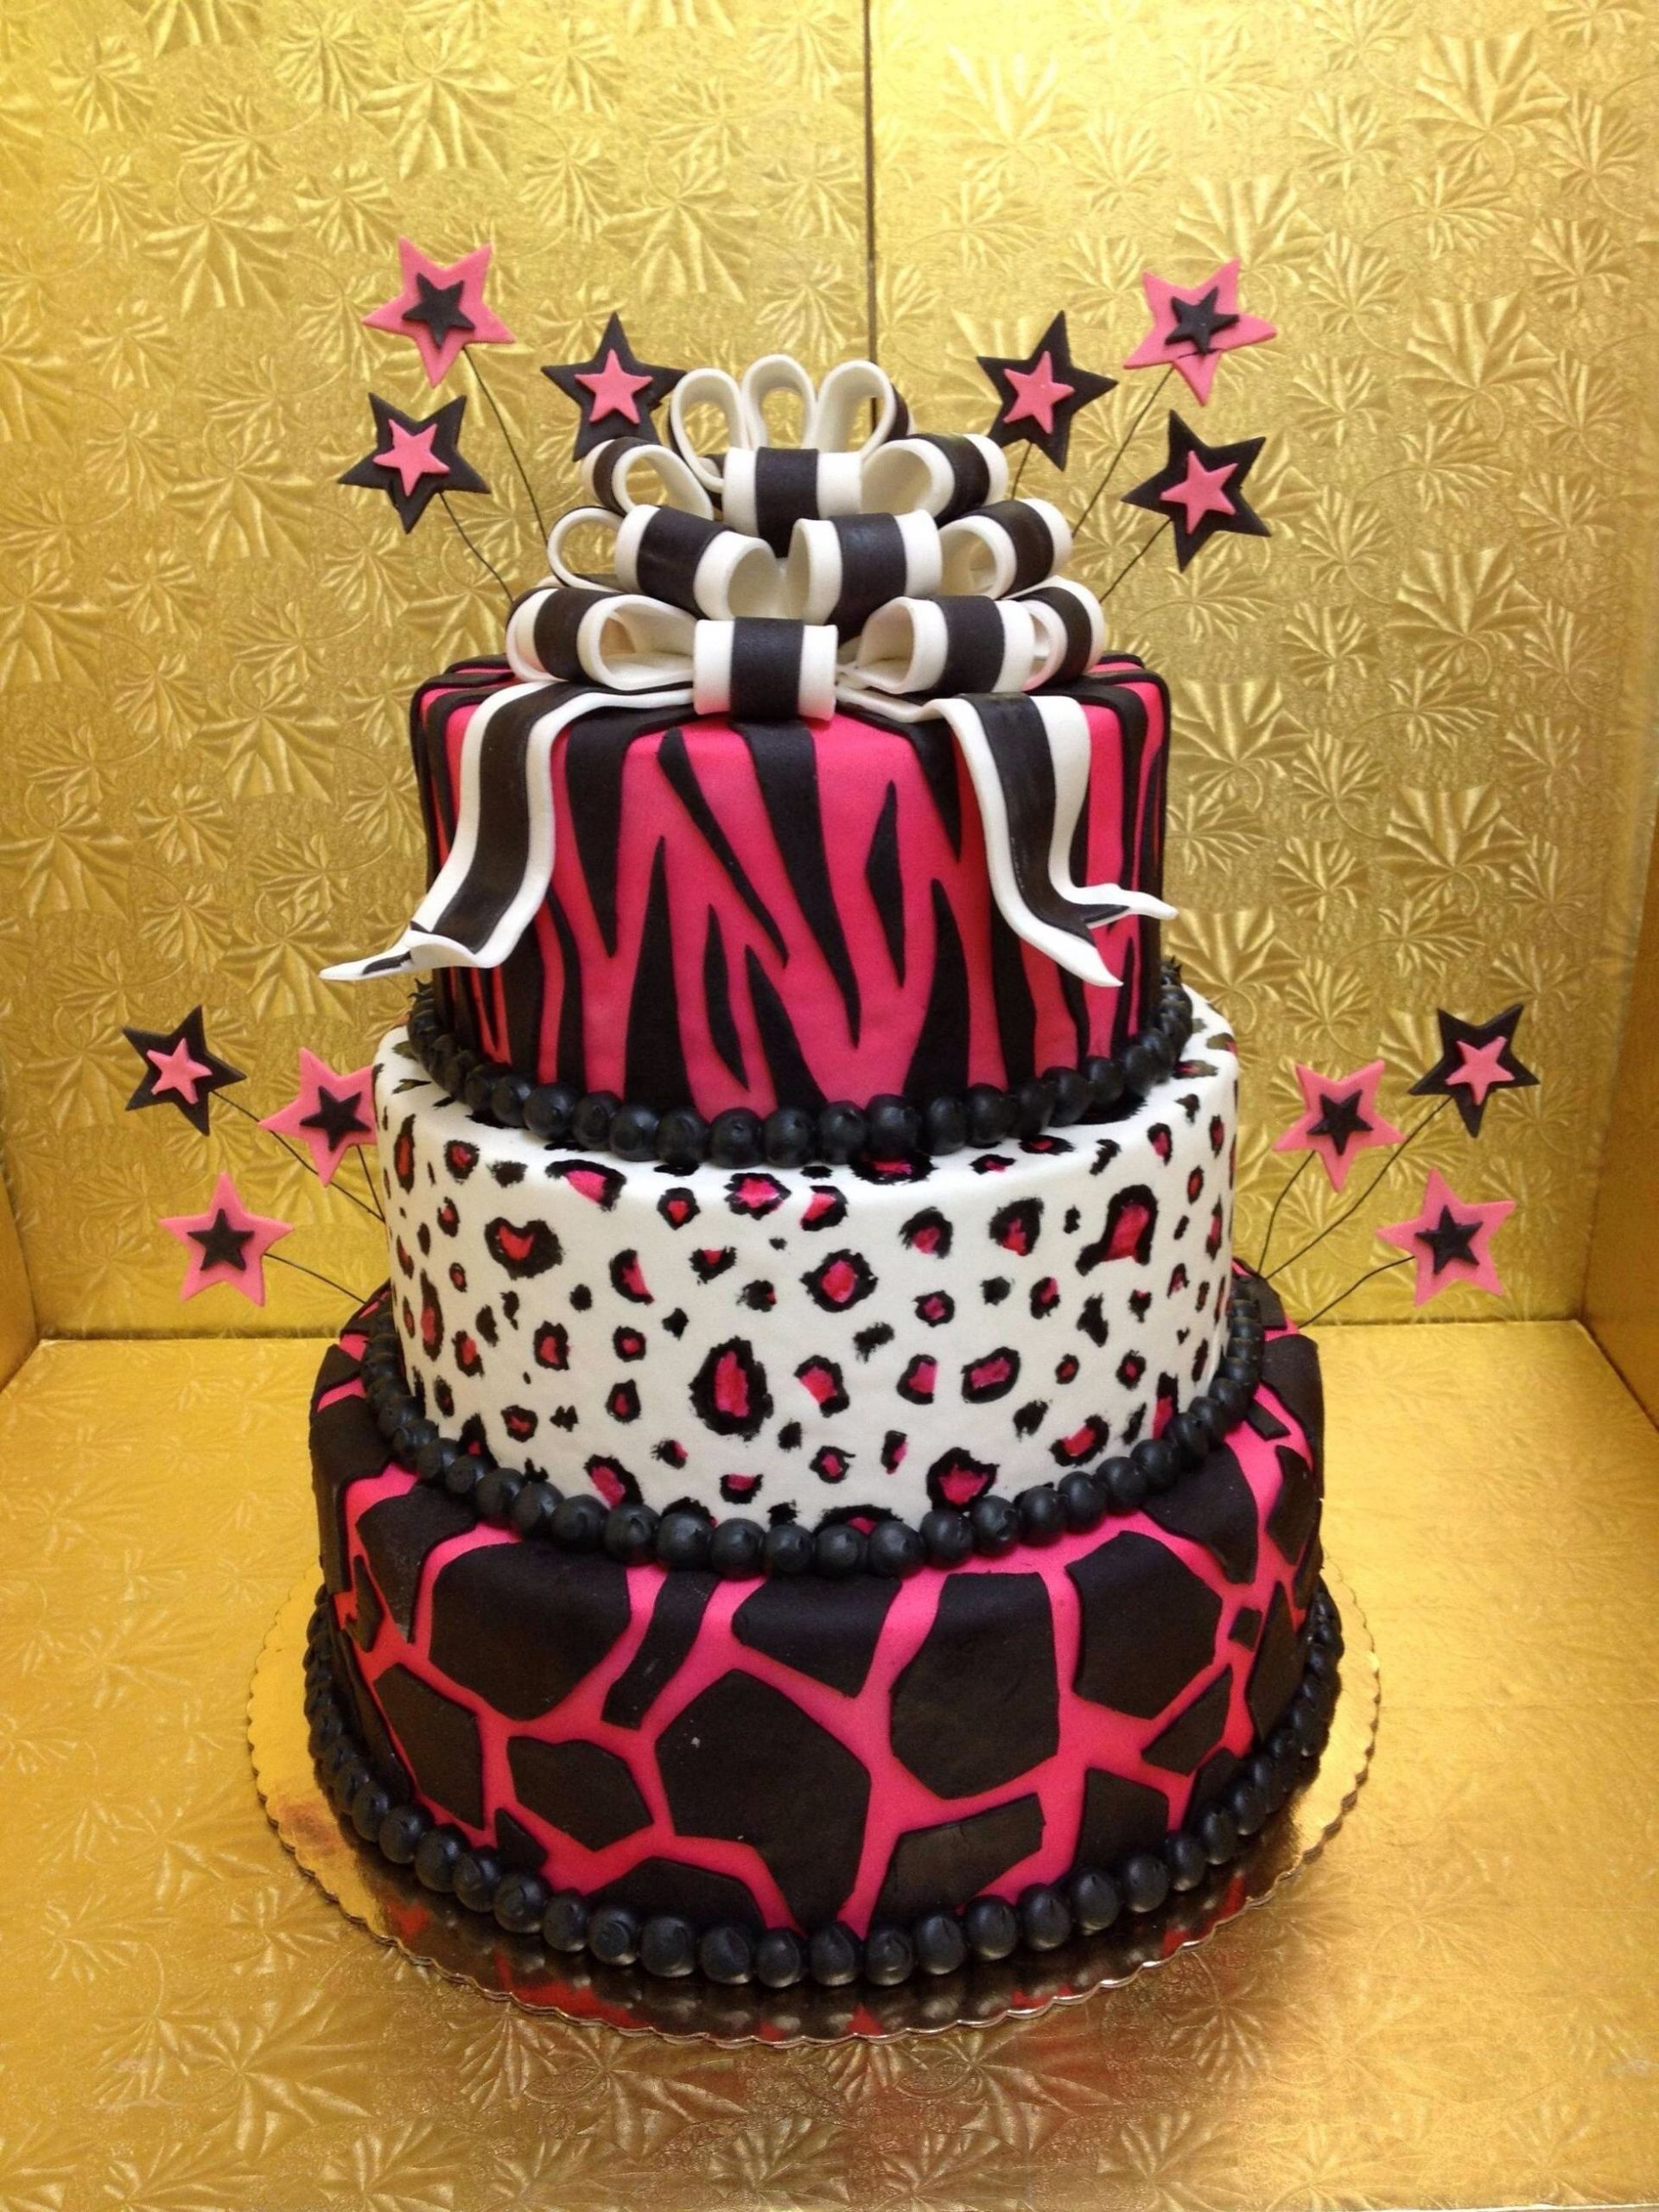 Cheetah Print Birthday Cake
 A teenage girl would love this cake for her 16th birthday